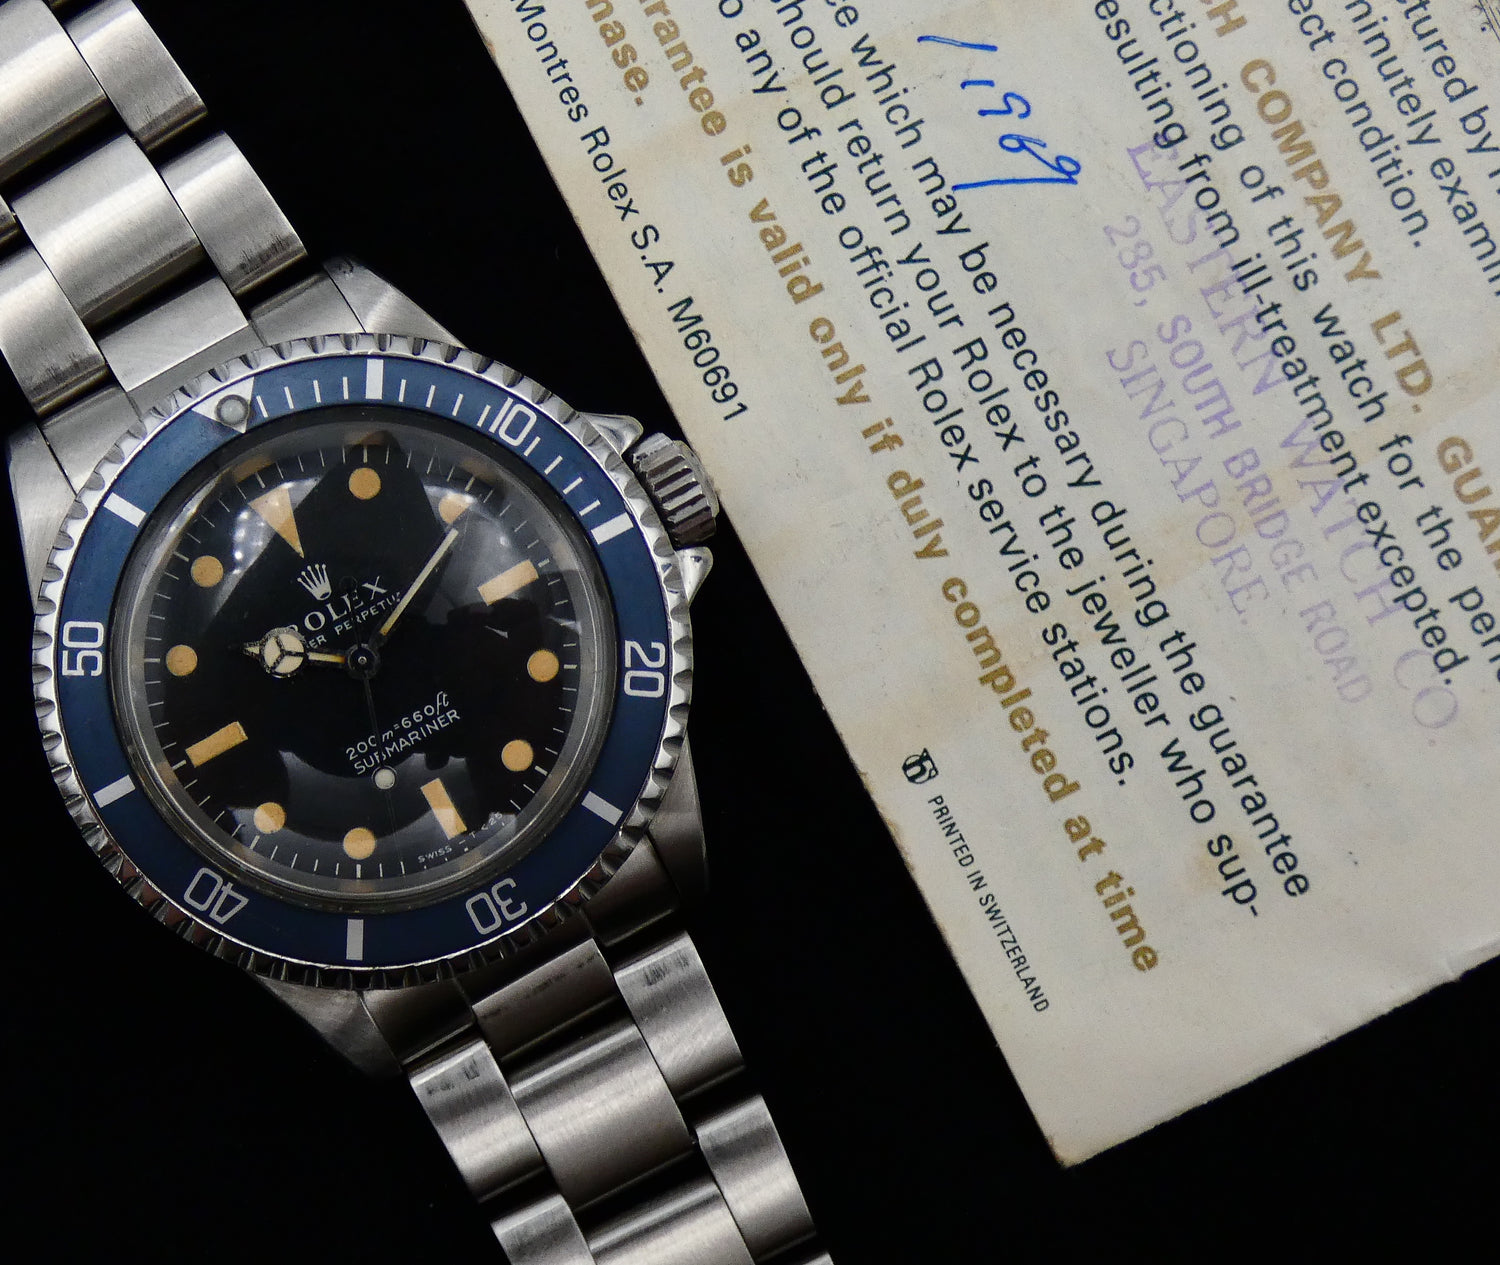 Rolex Submariner (No Date) Certified 5513 / Meters first / full set